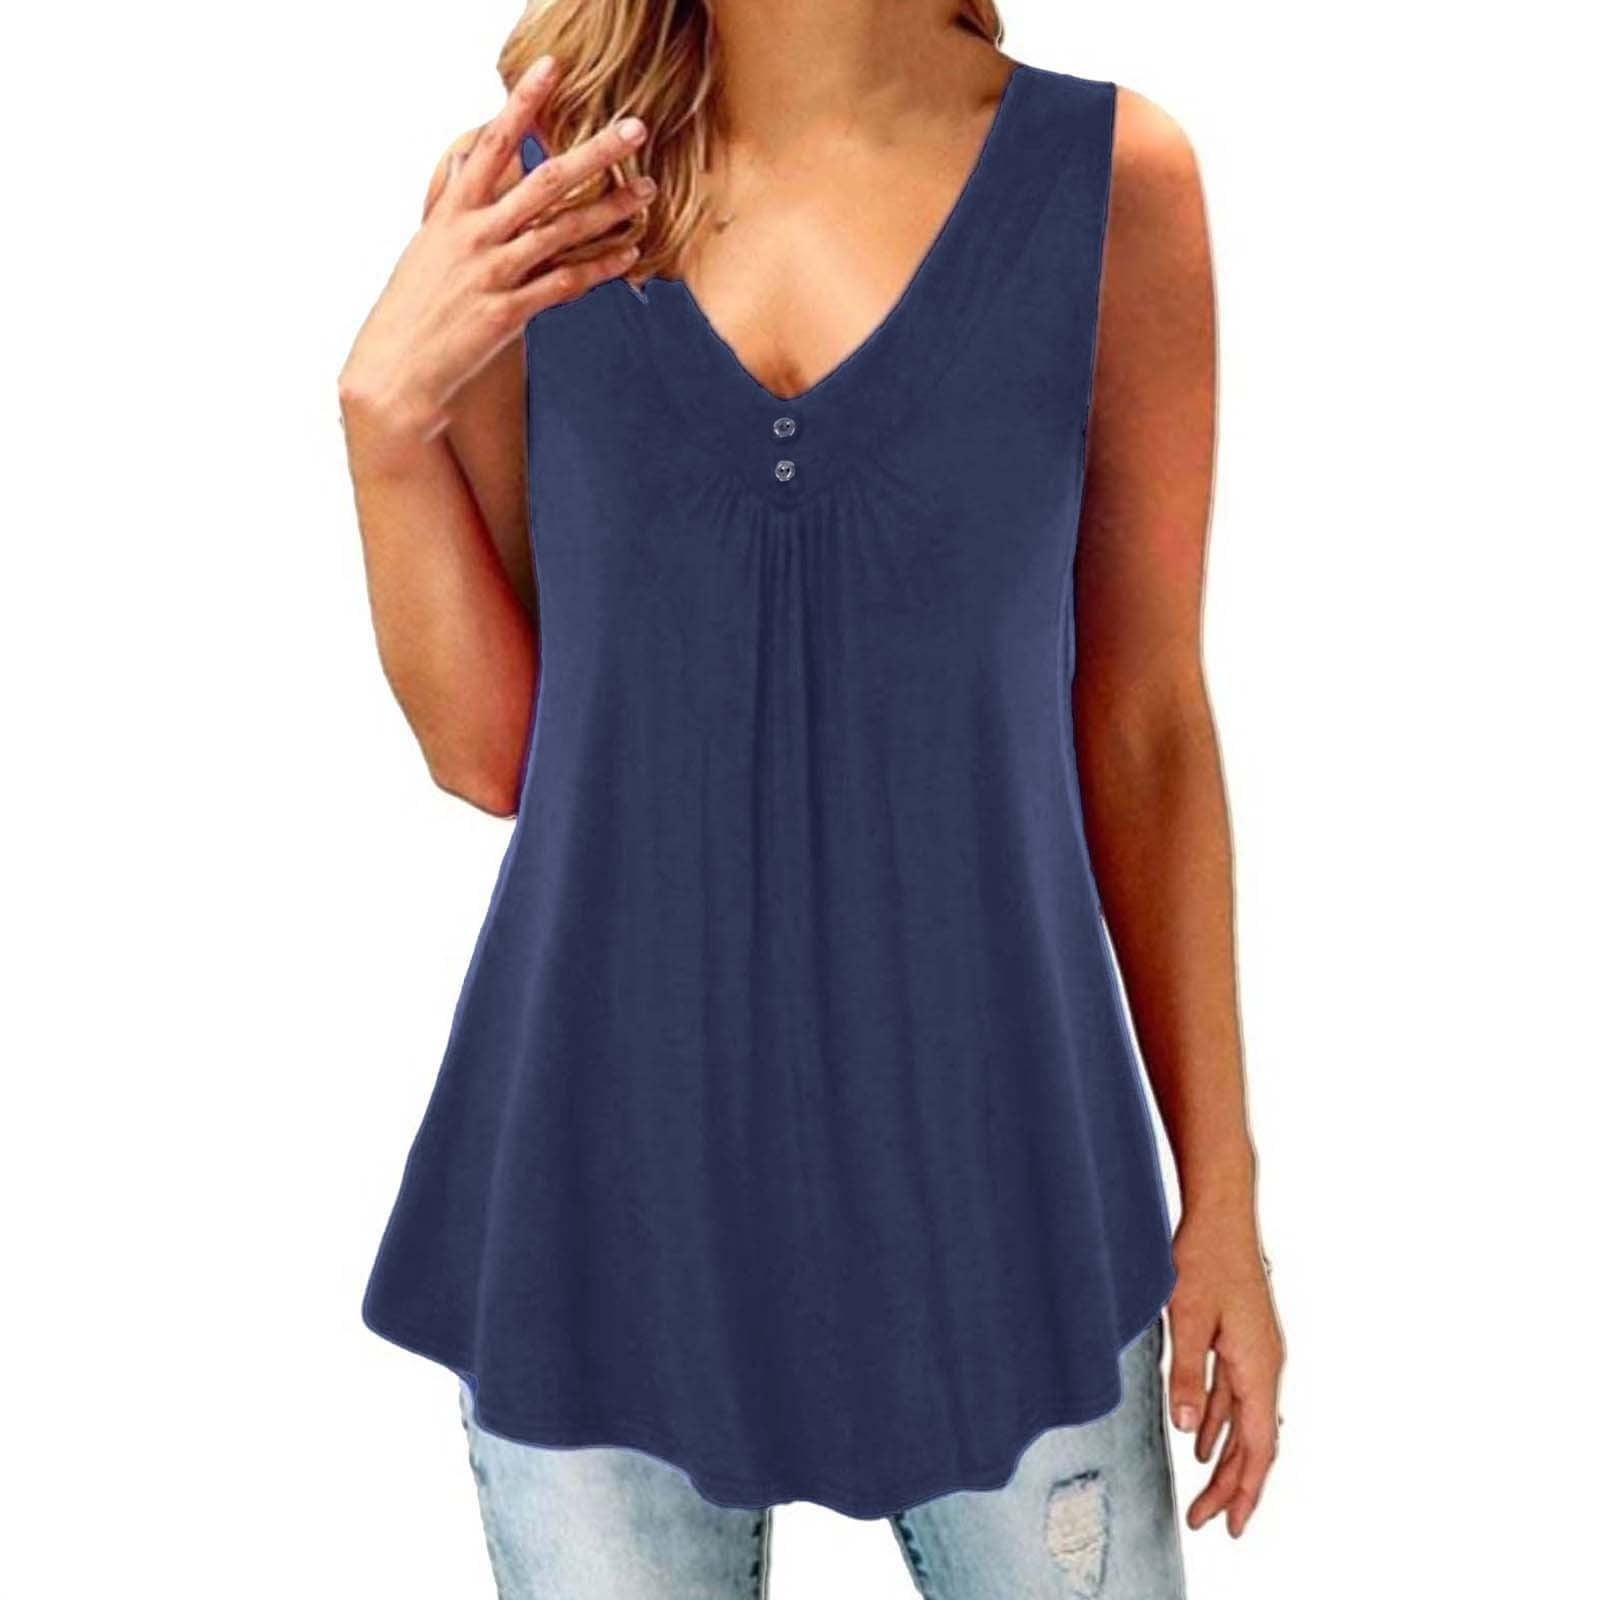 QLEICOM Summer Tank Tops for Women Loose Fit Pleated V Neck Sleeveless ...